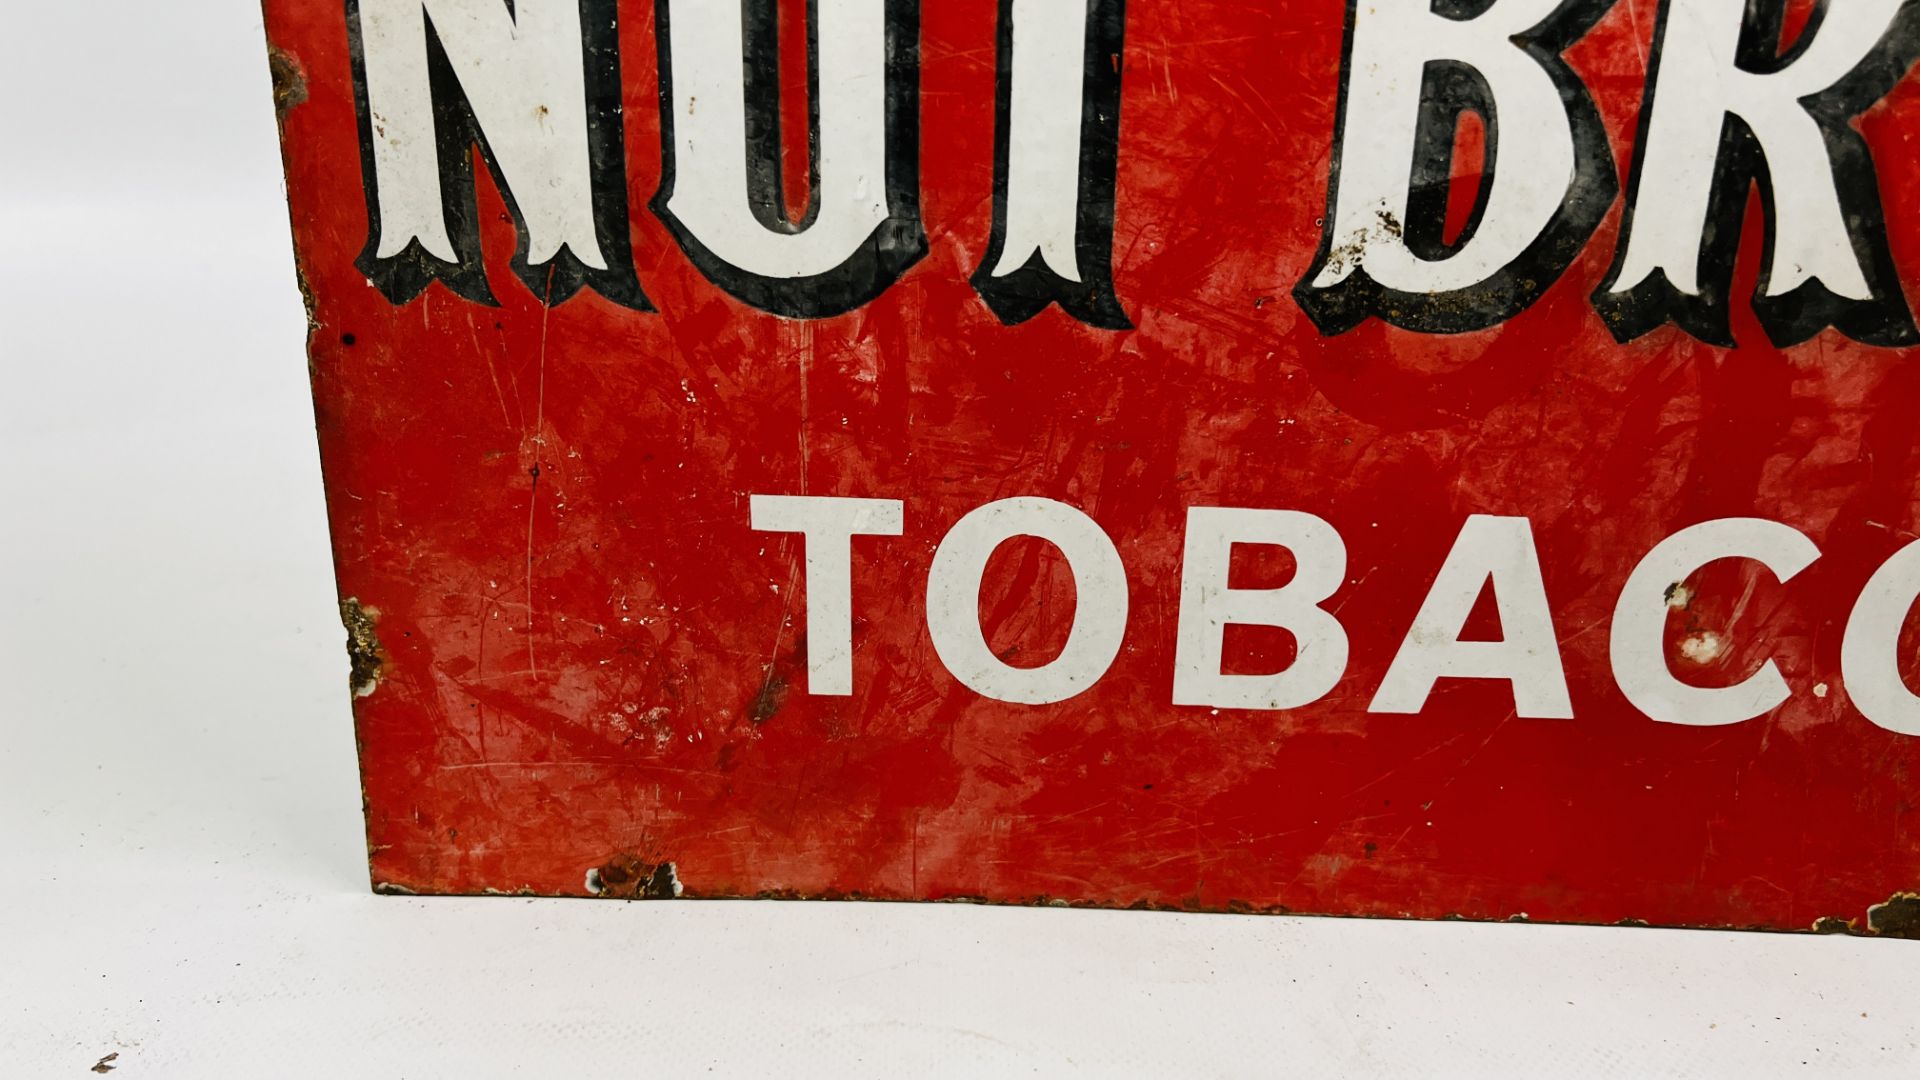 AN ORIGINAL VINTAGE DOUBLE SIDED ENAMEL SIGN "WE SELL NUT BROWN TOBACCO" - W 45 X H 34.5CM. - Image 13 of 14